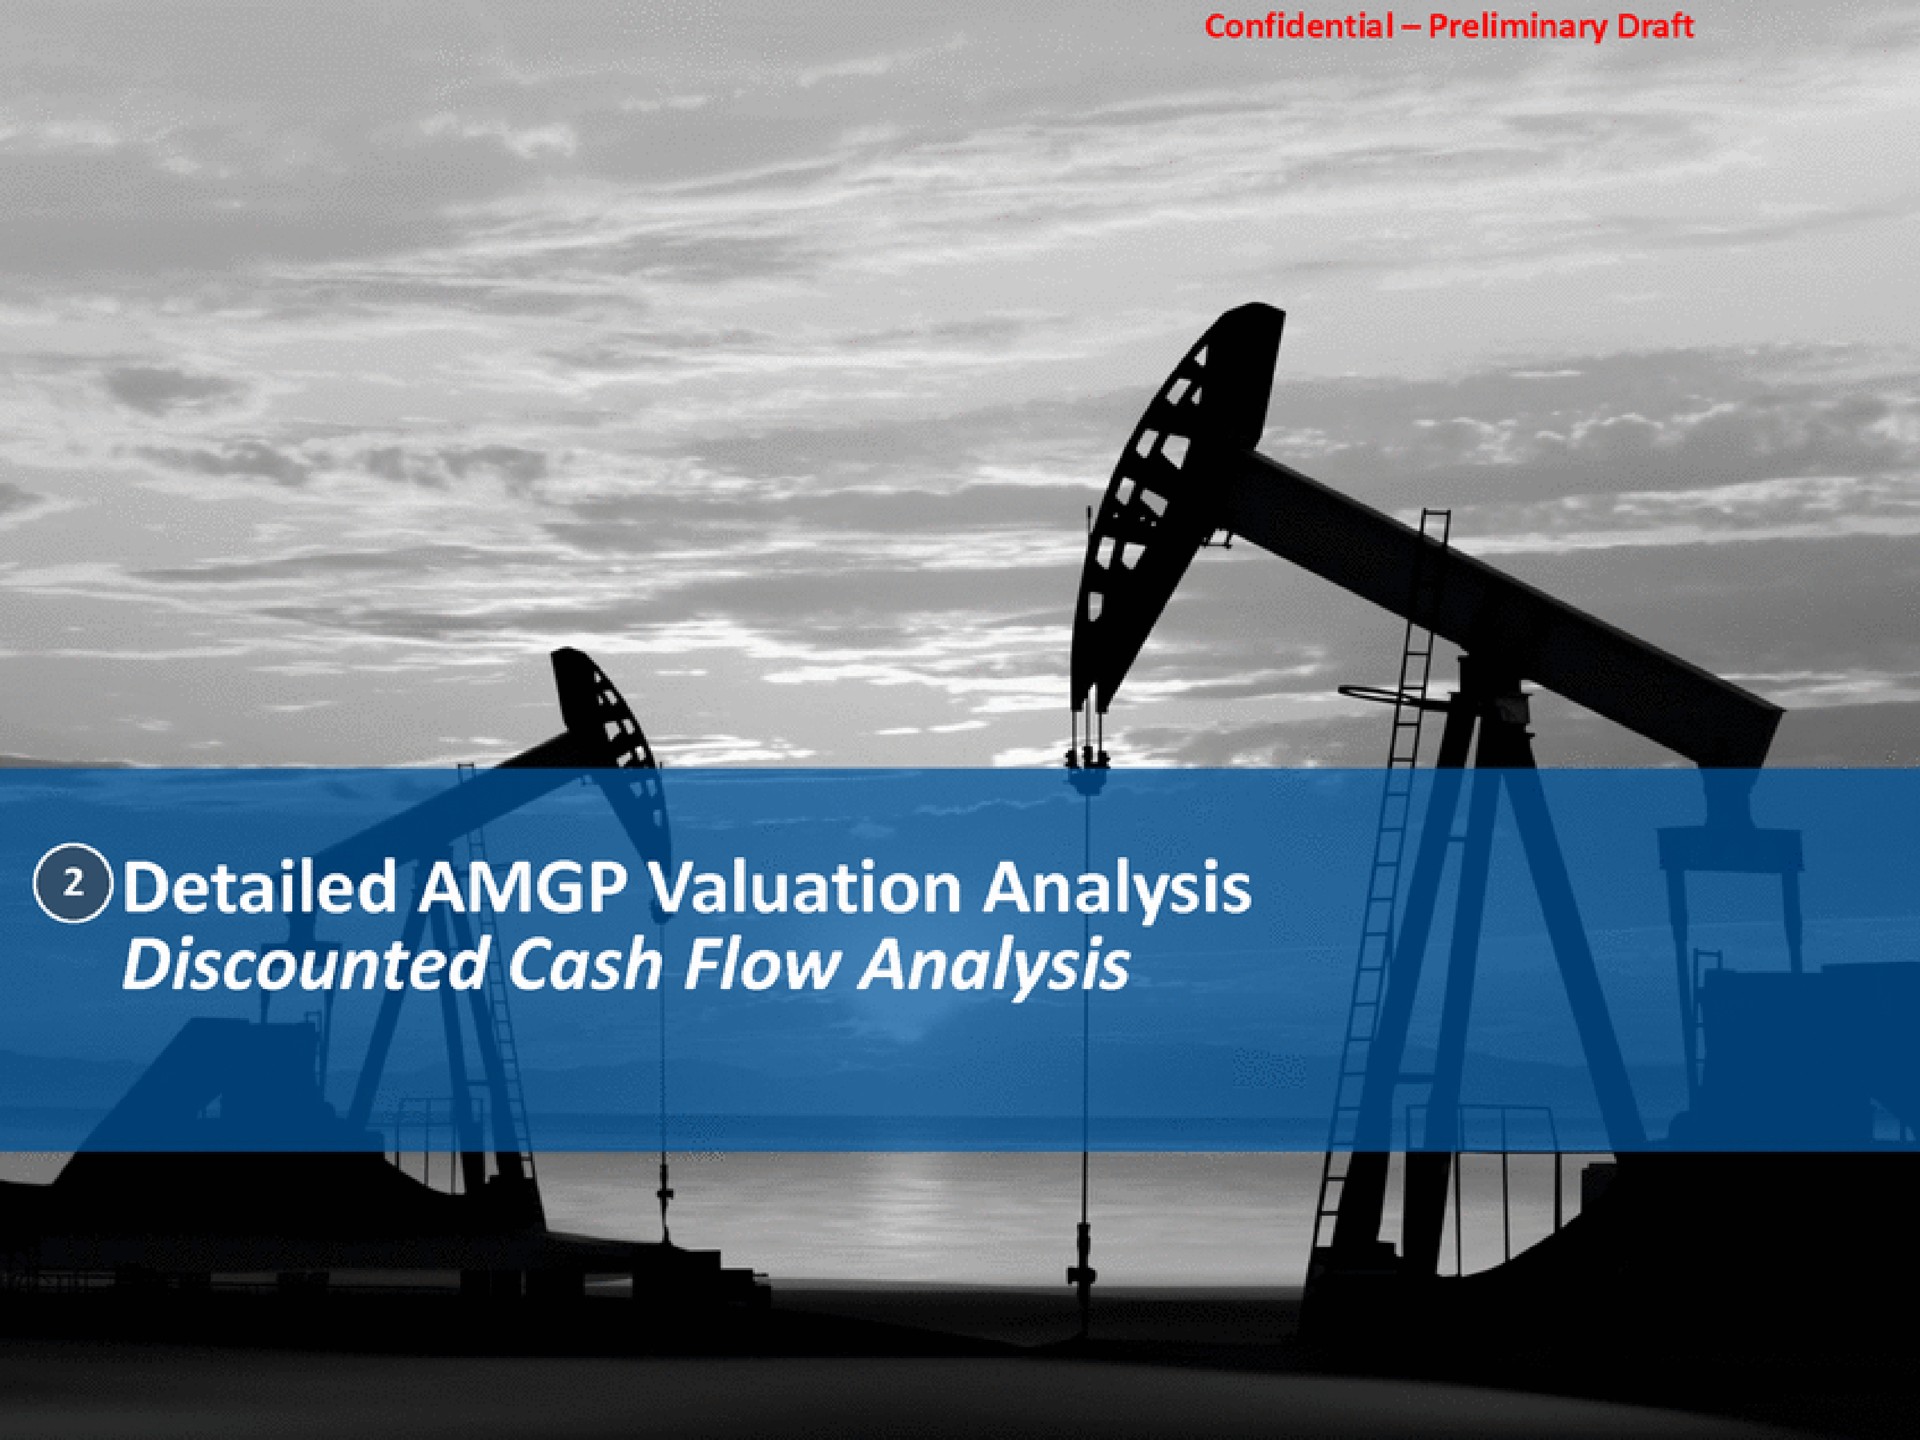 detailed valuation was discounted cash flow analysis | Baird